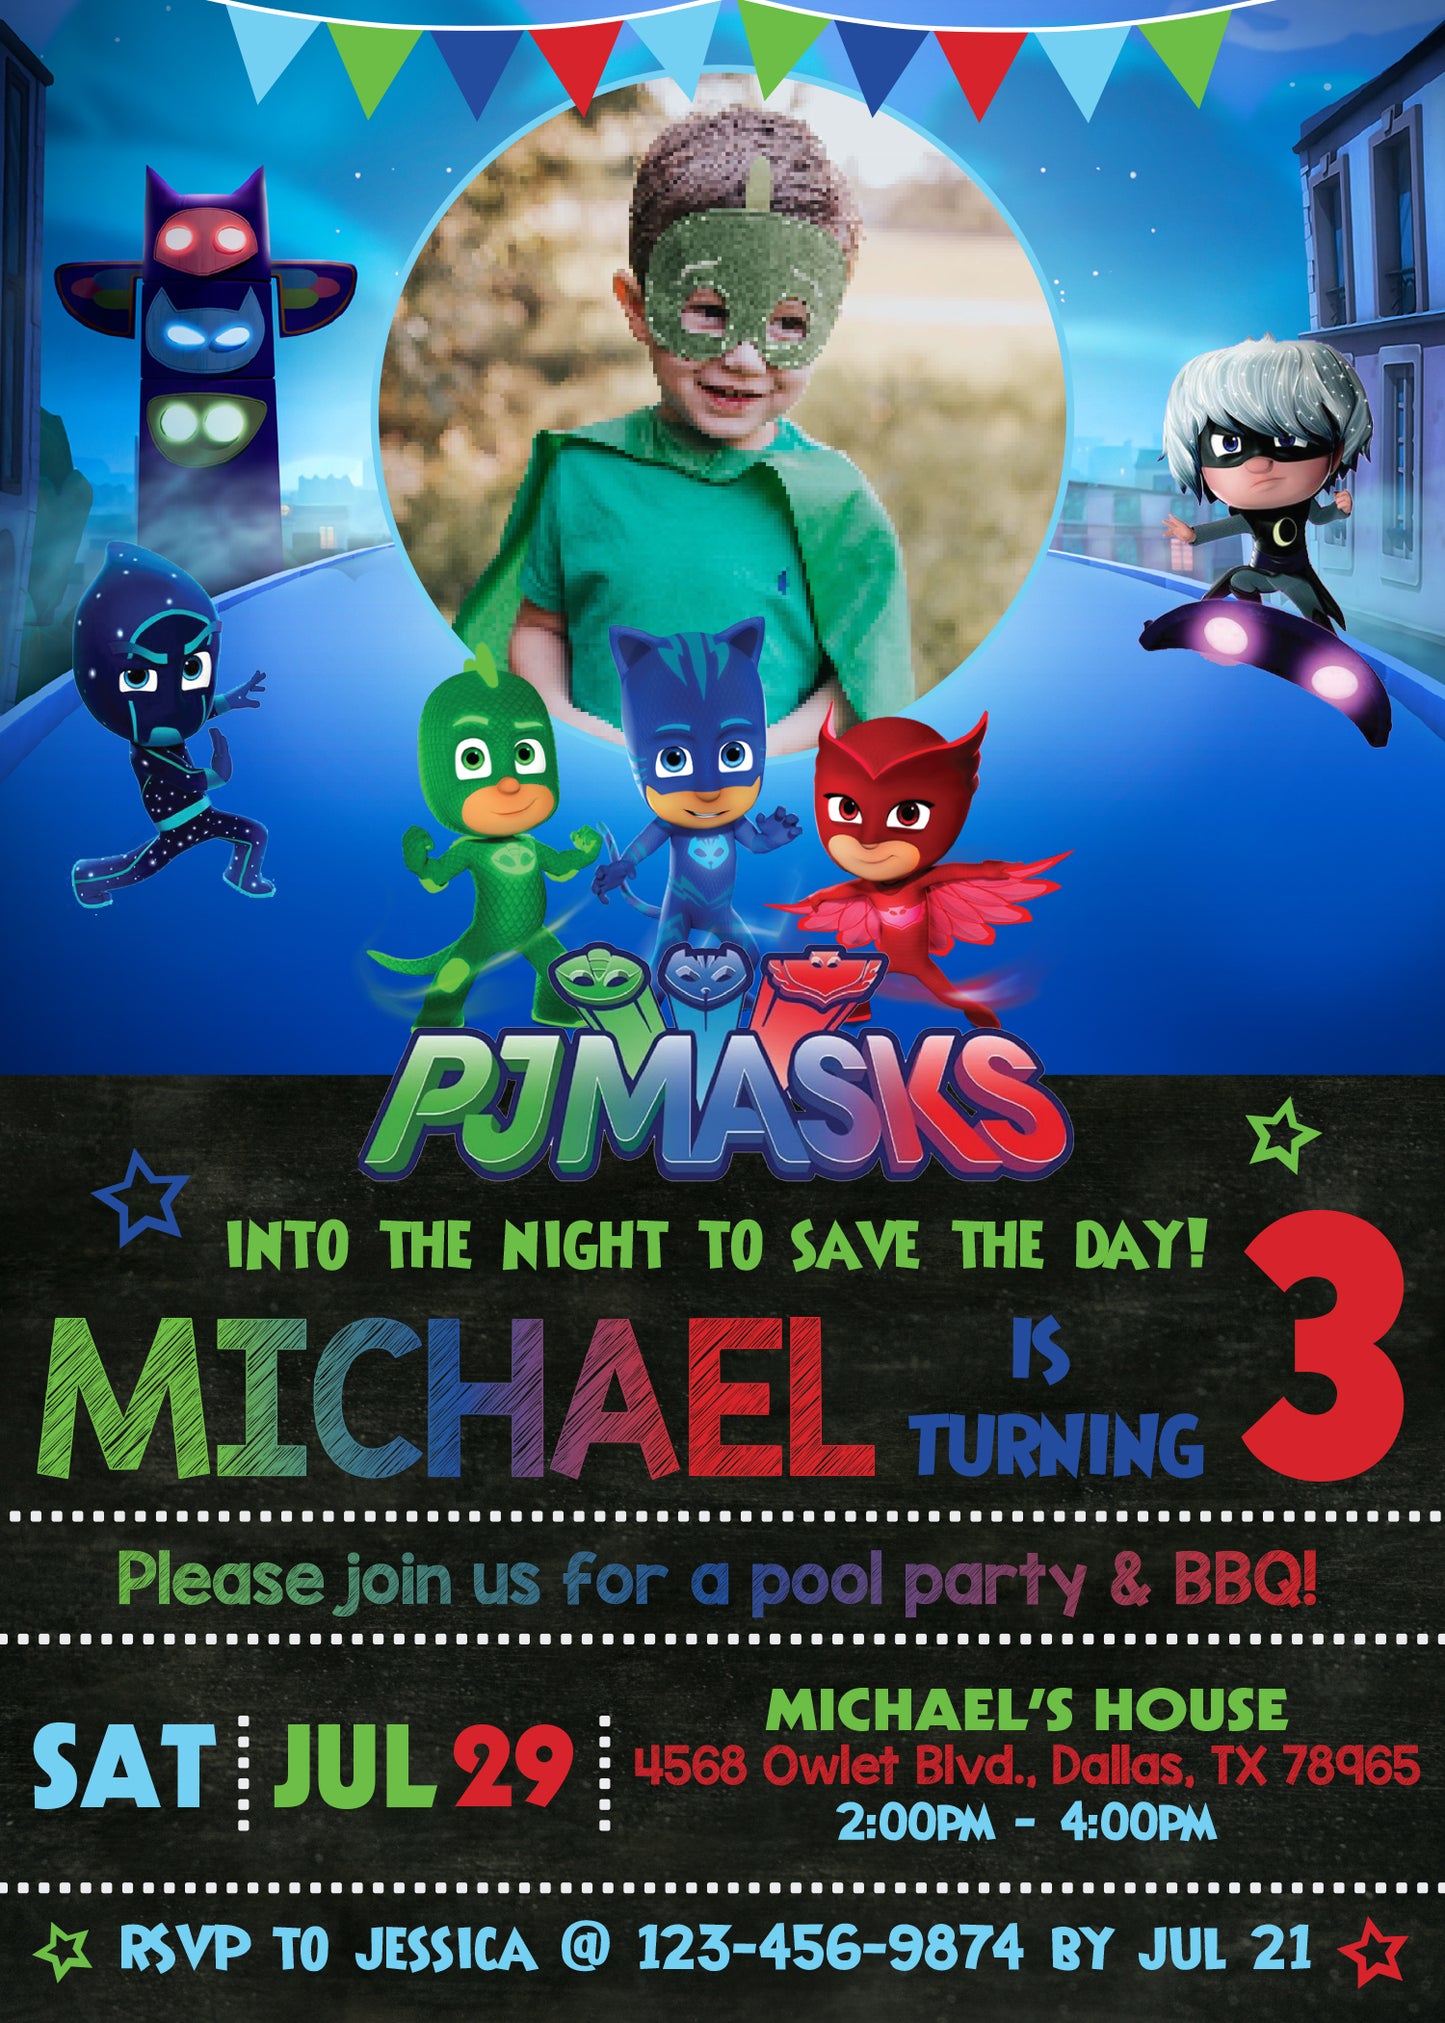 PJ MASKS Birthday Party Invitation - 2 Styles to Choose From! Printed or Digital!